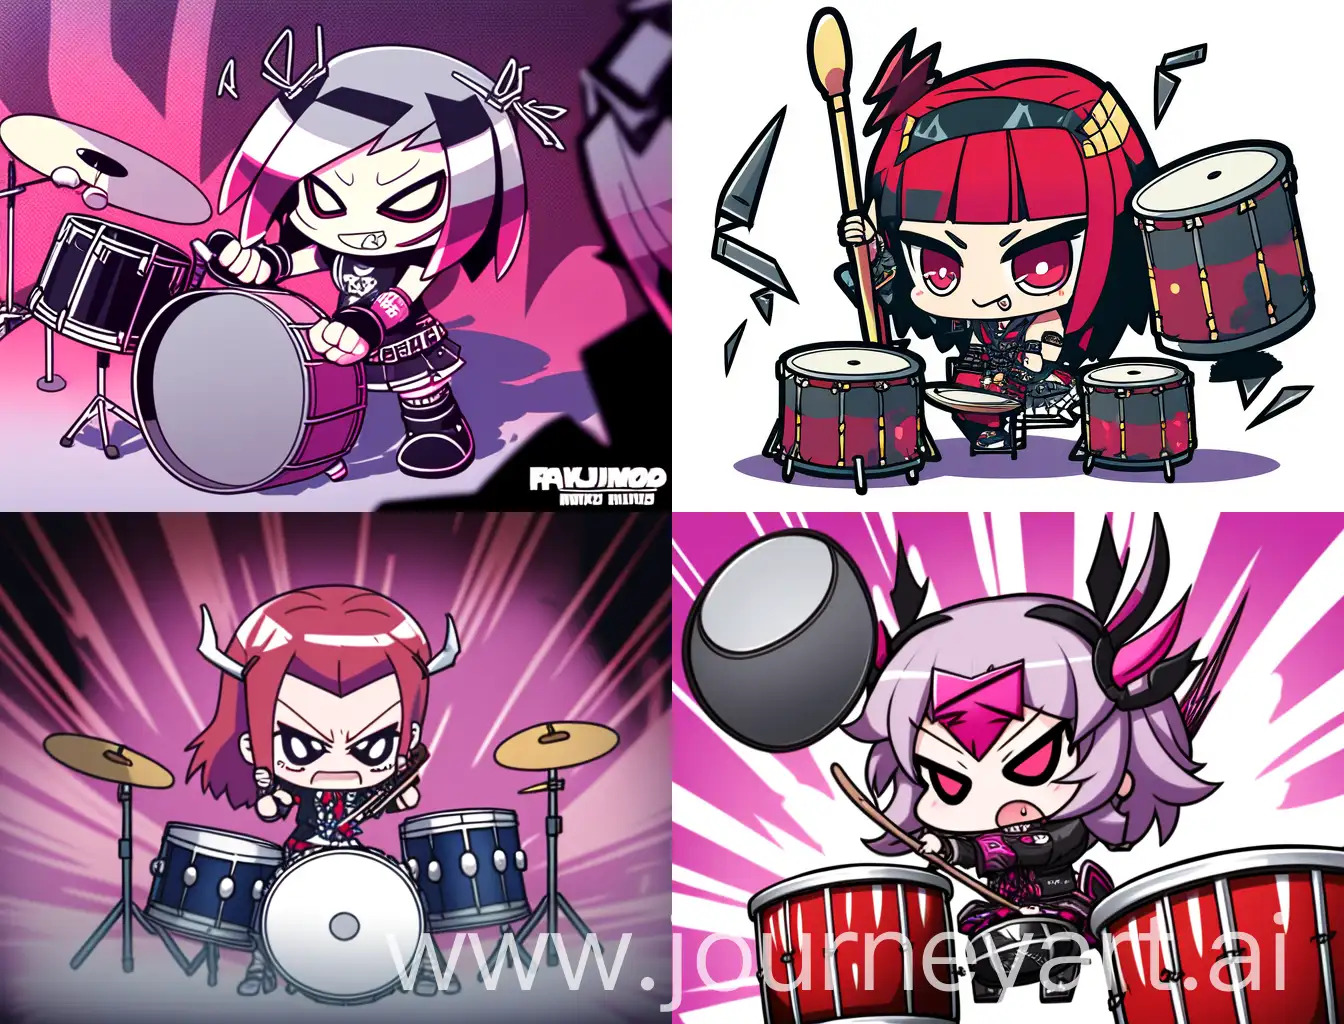 Chibi-Emo-Girl-Drumming-in-Cartoon-Anime-Style-with-Strong-Lines-on-Horror-Background